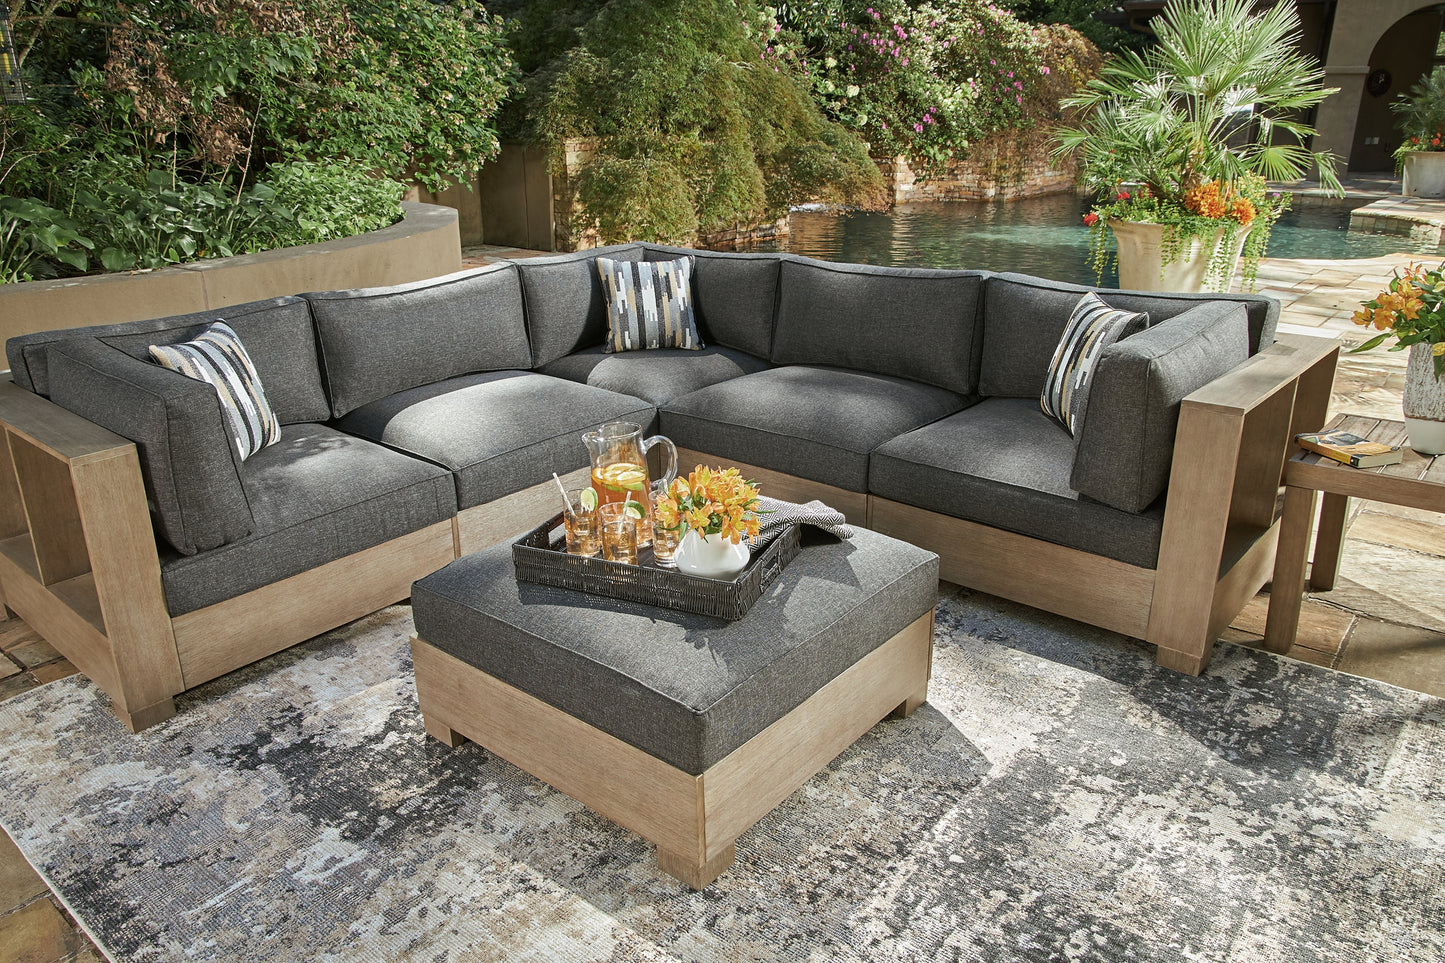 Citrine Park 5-Piece Outdoor Sectional with Ottoman